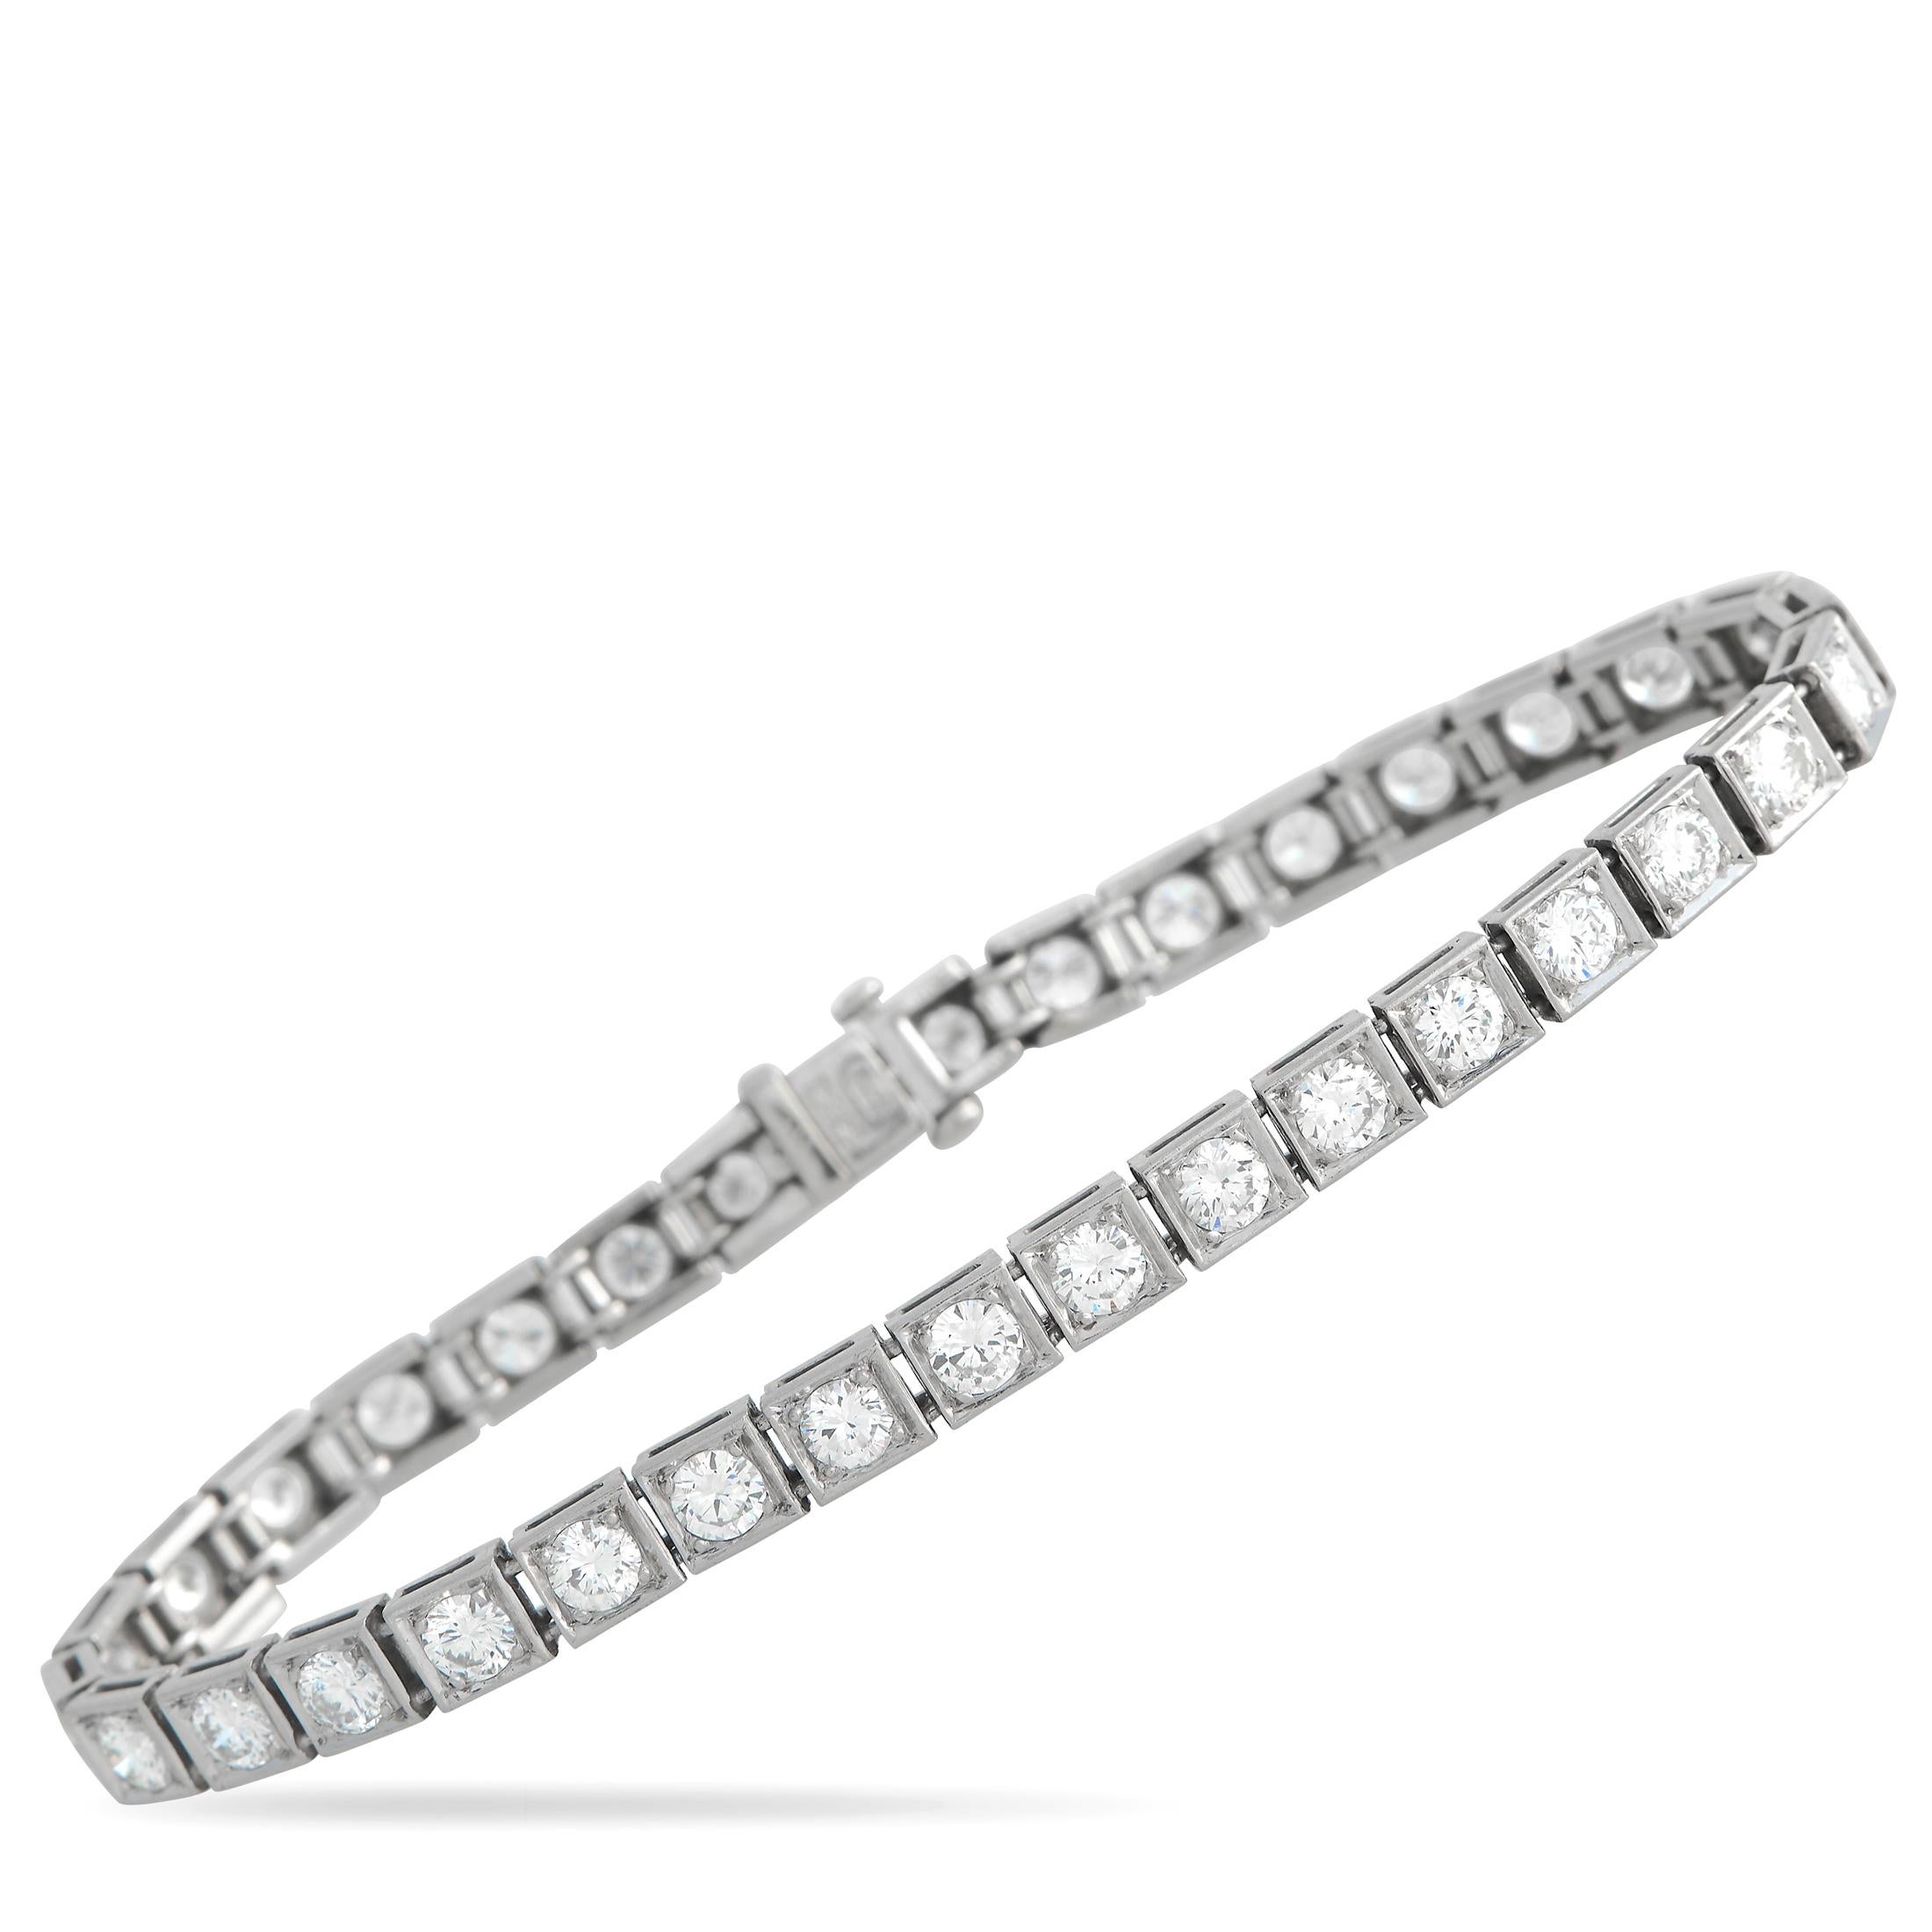 Platinum 6.0ct Diamond Bracelet MF23-012224 In Excellent Condition For Sale In Southampton, PA